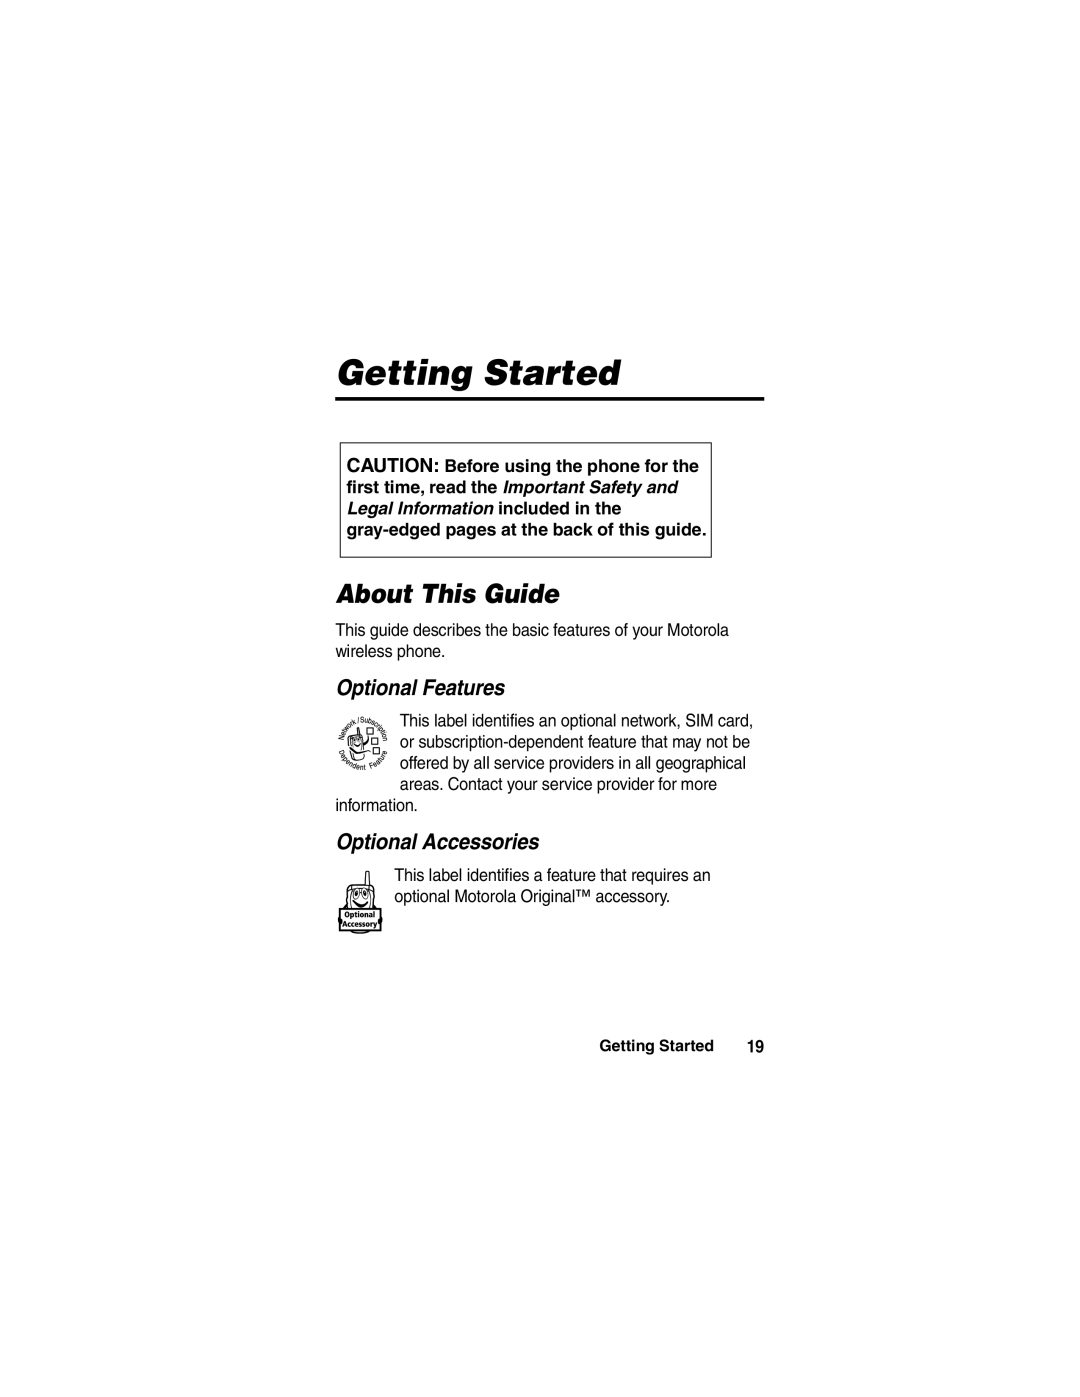 Motorola A780 manual Getting Started, About This Guide, Optional Features, Optional Accessories, 032259o 